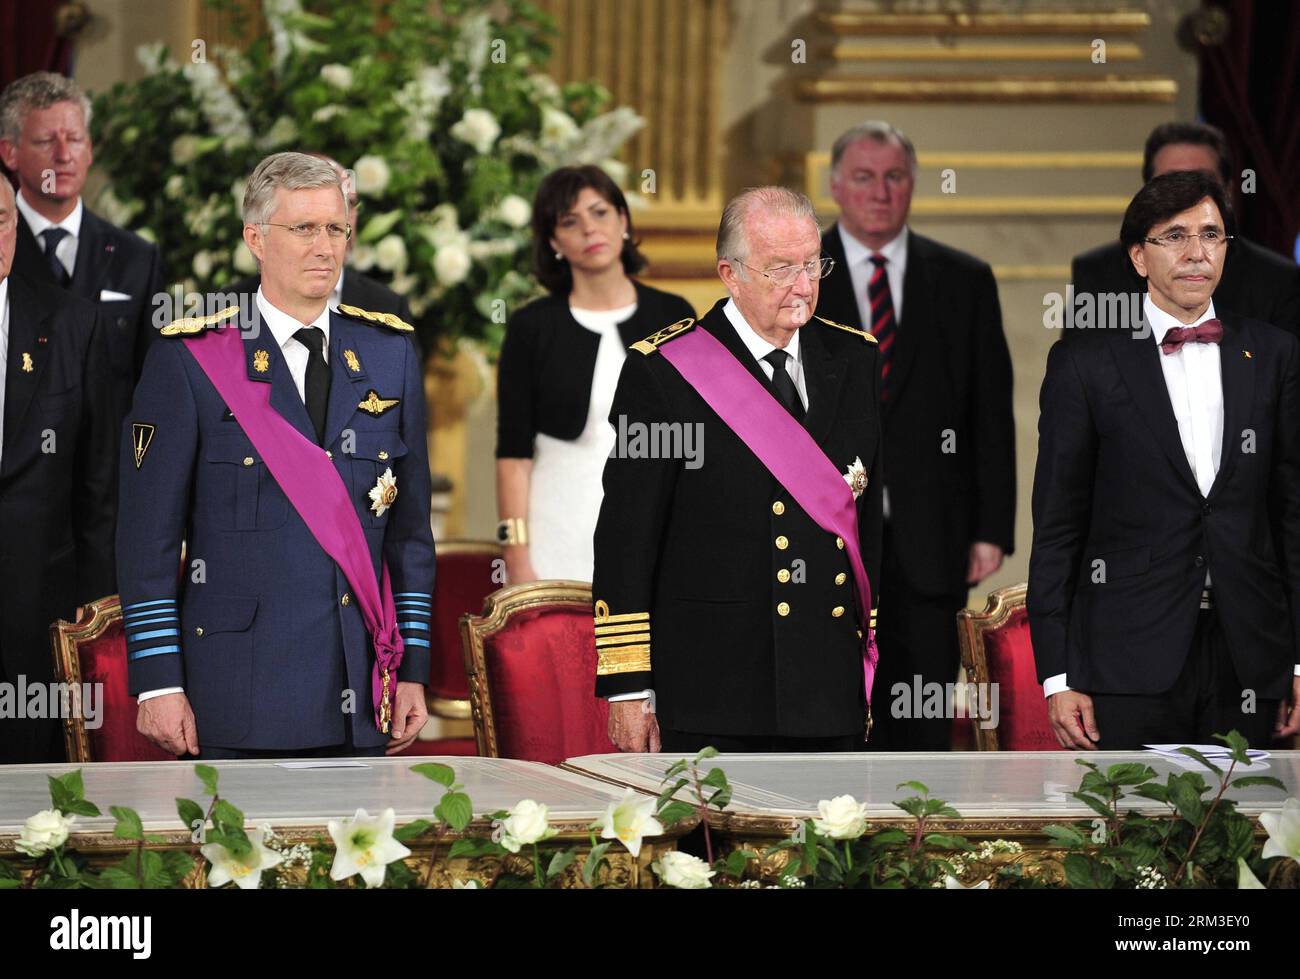 Bildnummer: 60168363  Datum: 21.07.2013  Copyright: imago/Xinhua (130721) -- BRUSSELS, July 21, 2013 (Xinhua) -- Belgium s King Albert II (C, front), Prince Philippe (L, front) and Prime Minister Elio Di Rupo (R, front) attend the abdication ceremony at the Royal Palace in Brussels, capital of Belgium, on July 21, 2013, the country s national day.   (Xinhua/Ye Pingfan)(xzj)  BELGIUM-BRUSSELS  PUBLICATIONxNOTxINxCHN People Entertainment Adel Königshaus Belgien Amtswechsel Thronfolge Abdankung Thronwechsel Brüssel xdp x1x 2013 quer premiumd o0 Familie, privat, Vater, Eltern, Kind, Sohn     60168 Stock Photo